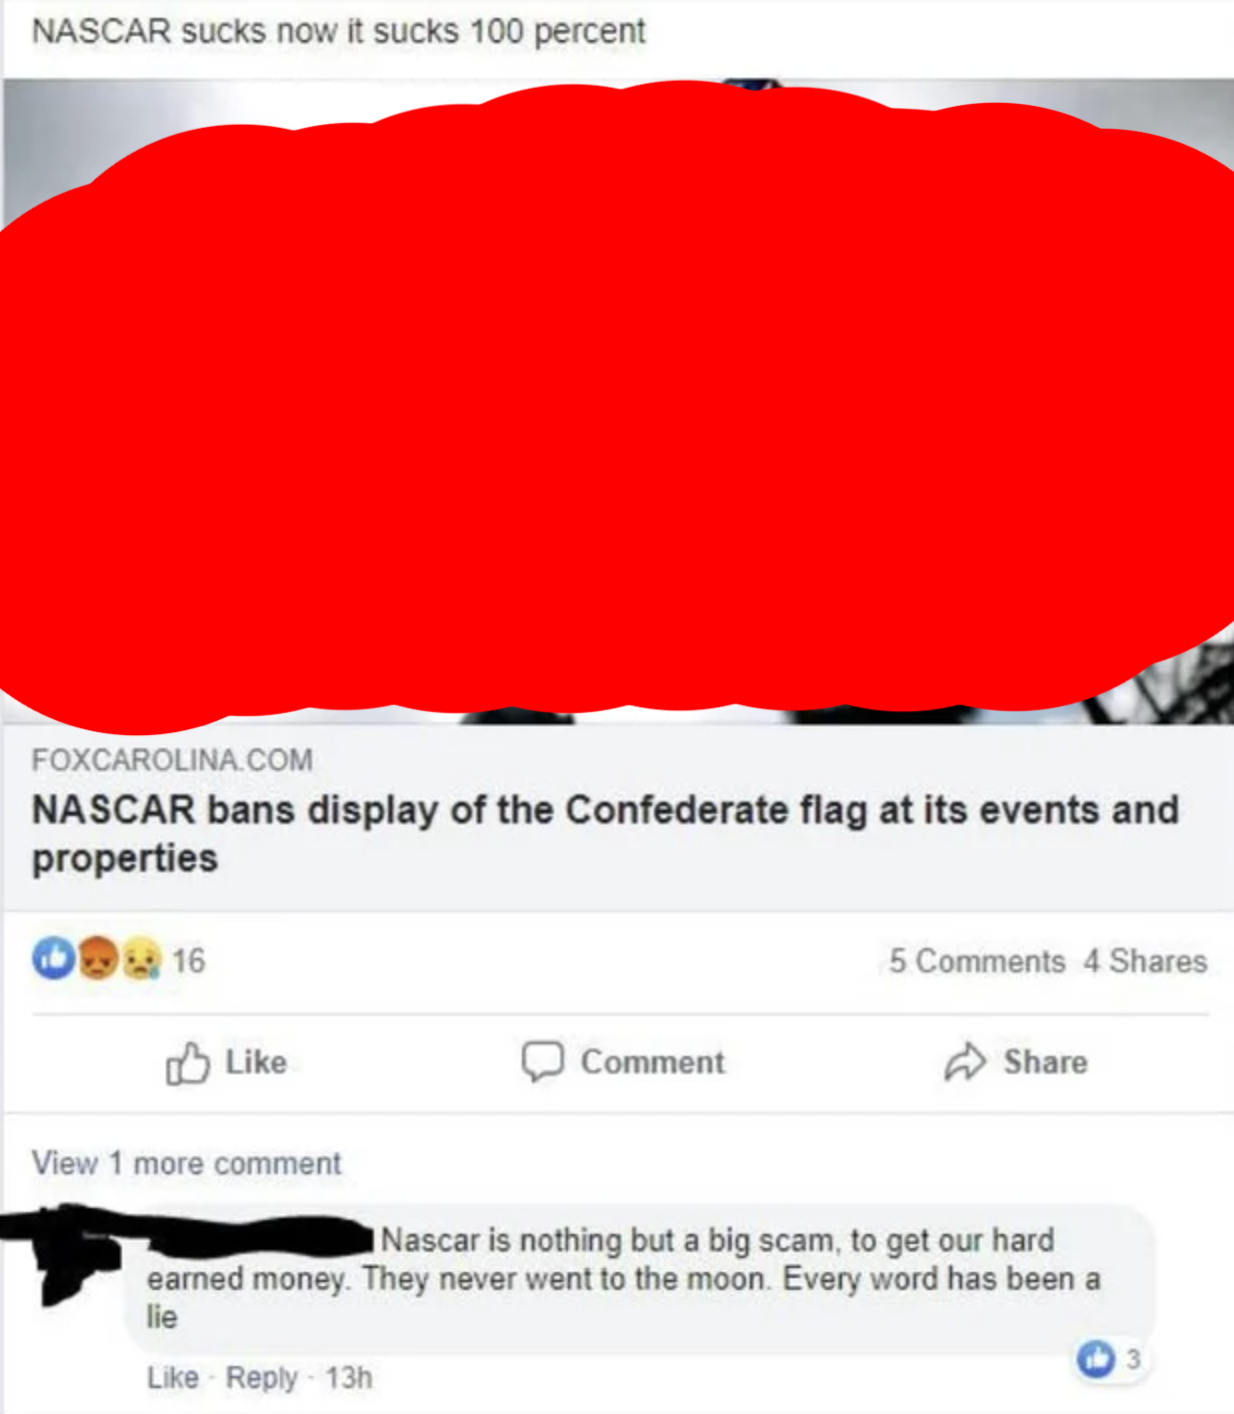 Facebook reply to an article about NASCAR banning Confederate flags saying that NASCAR is a scam because they never went to the moon